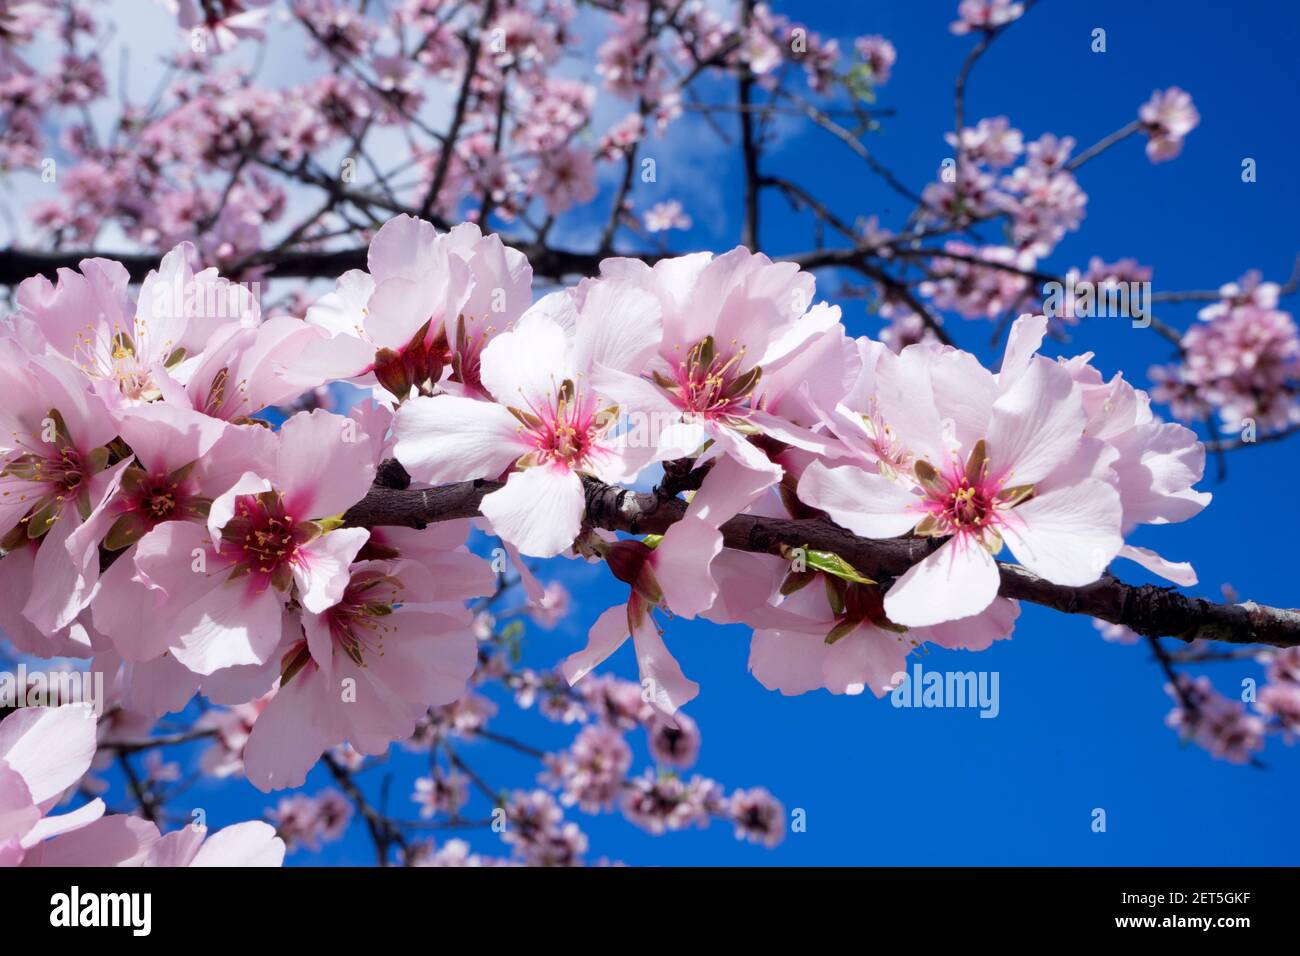 Almond flowers in full bloom against blue sky in the spring Stock Photo